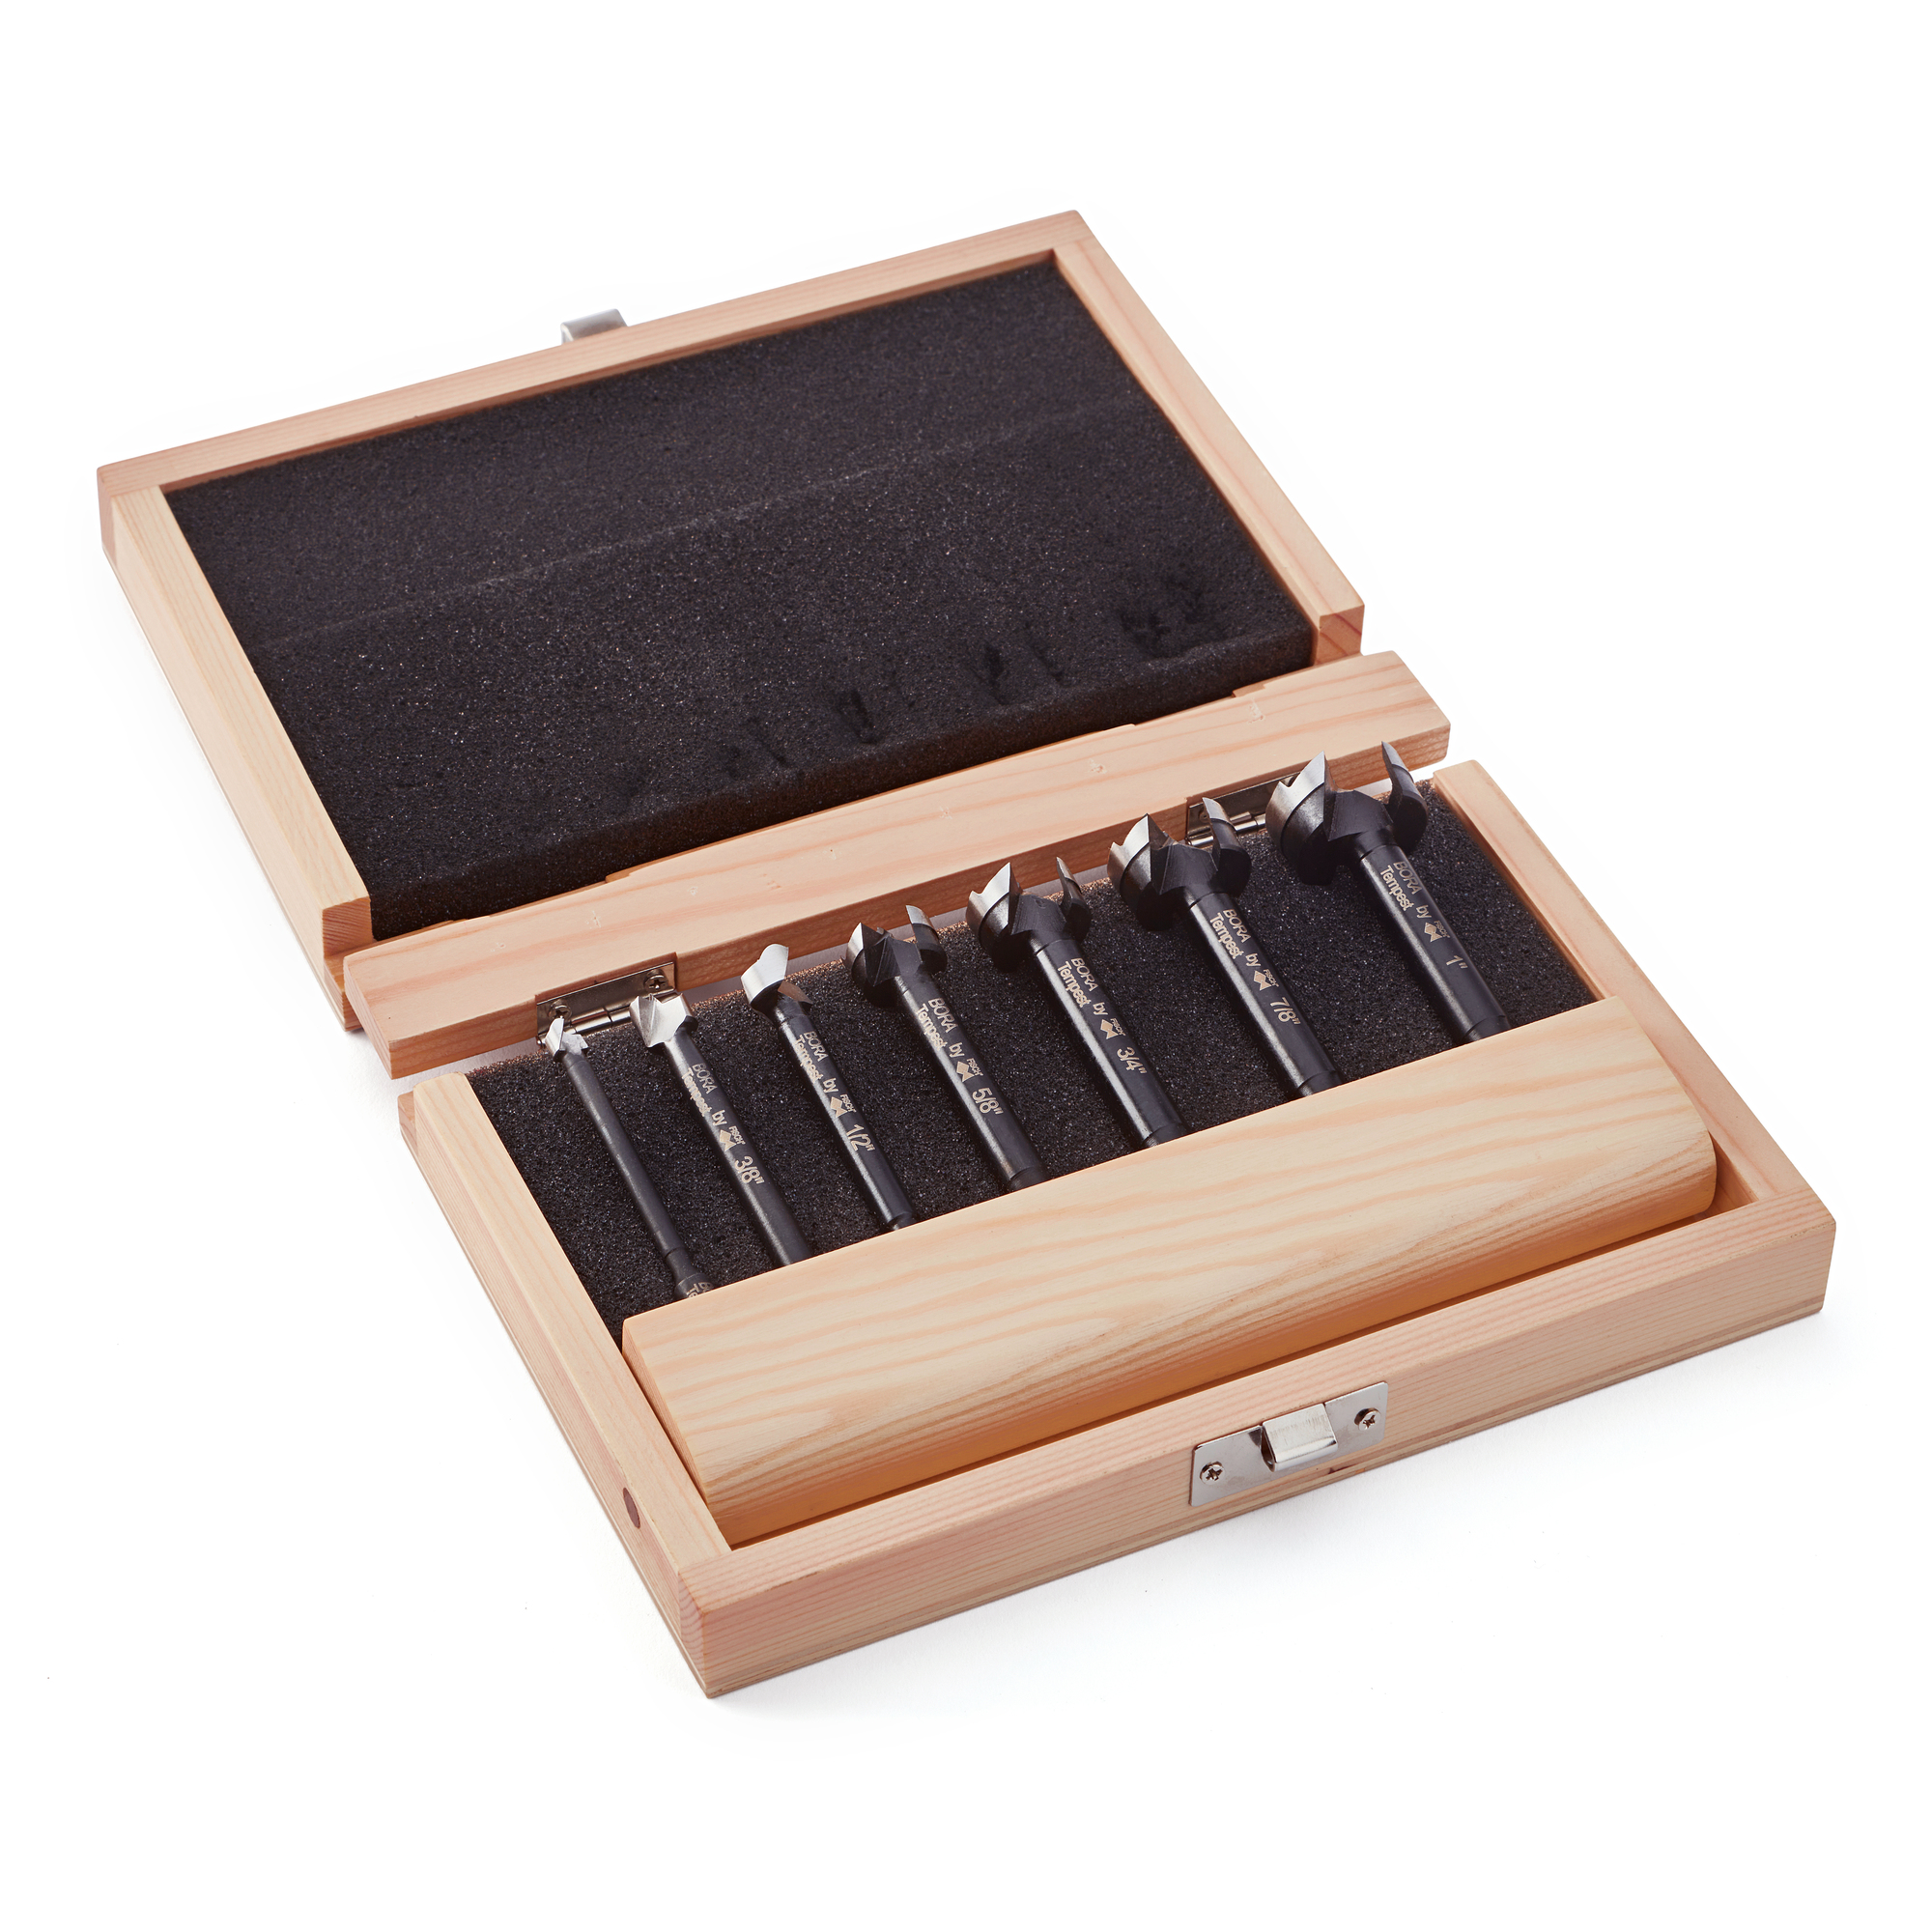 BORA, Tempest Forstner Bit: 7 Pc Set in Wood Box, Included (qty.) 1 Model BFB-009867